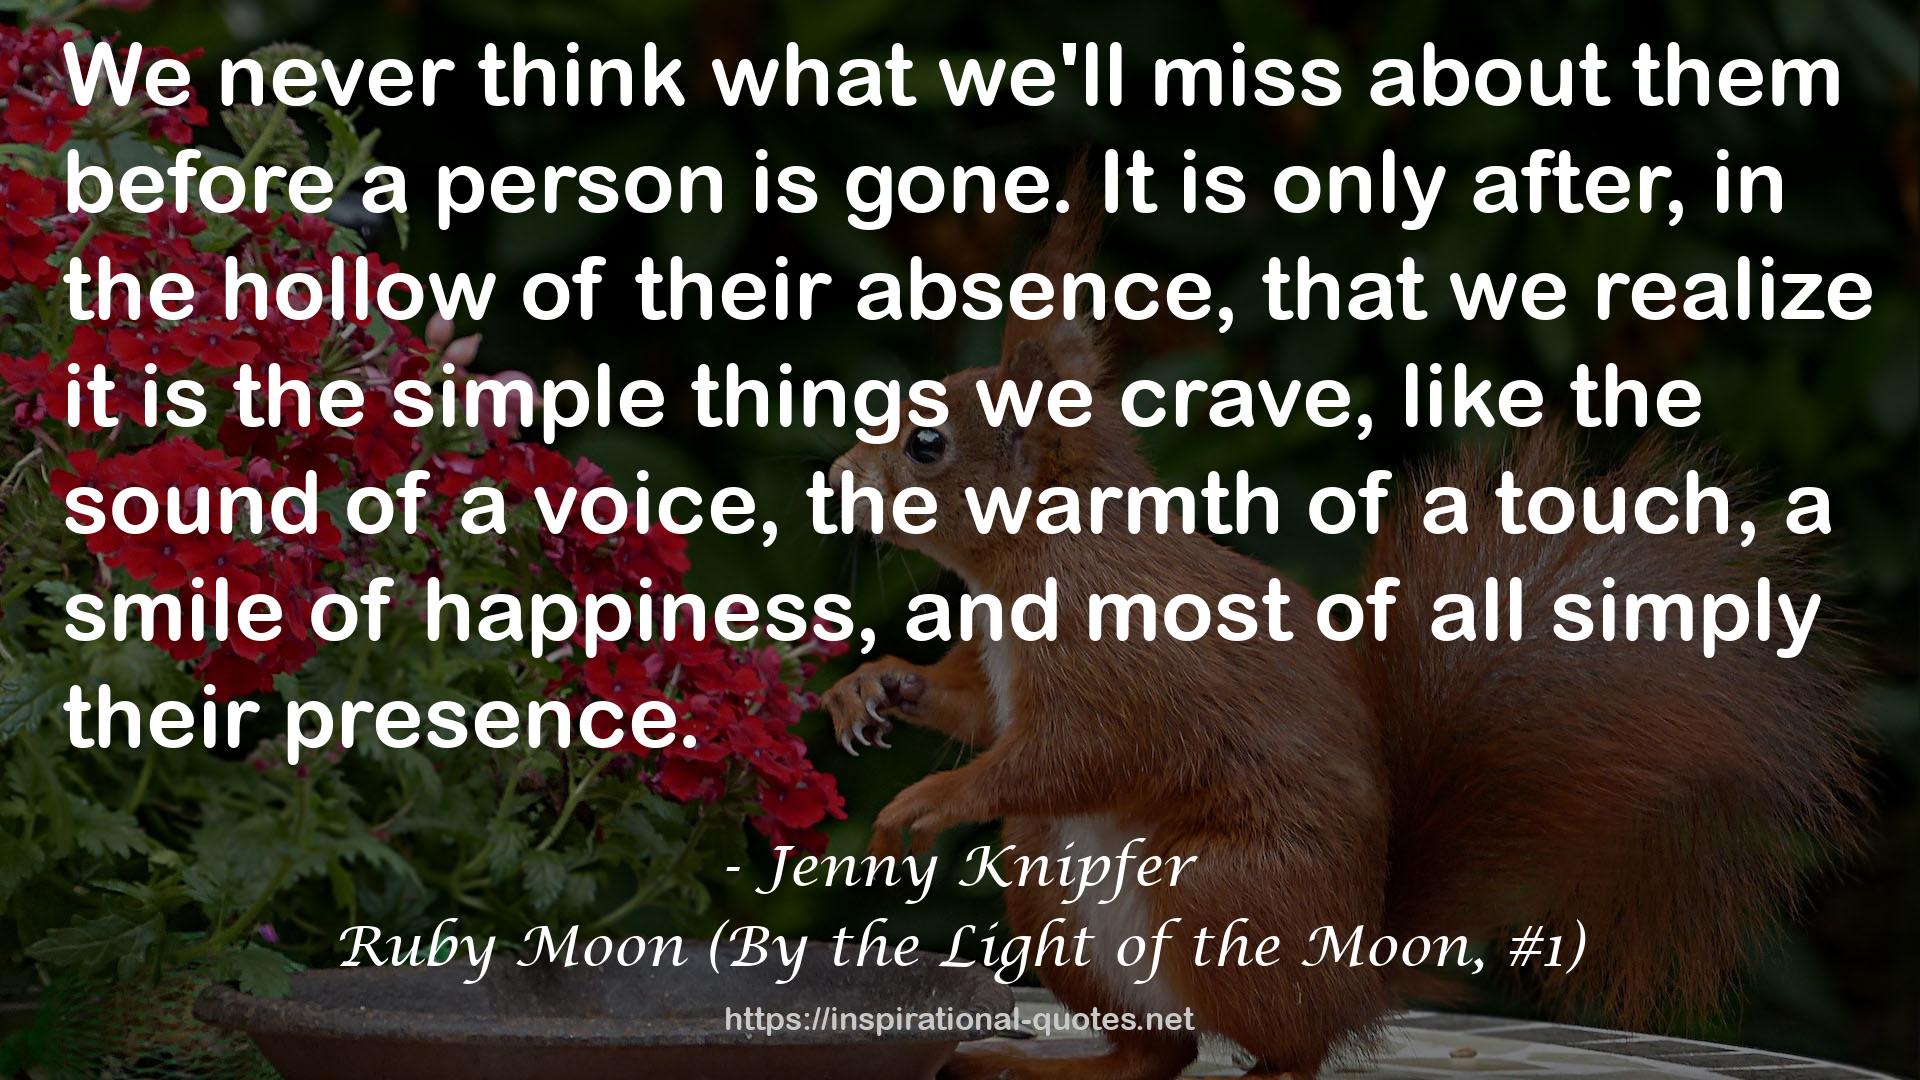 Ruby Moon (By the Light of the Moon, #1) QUOTES